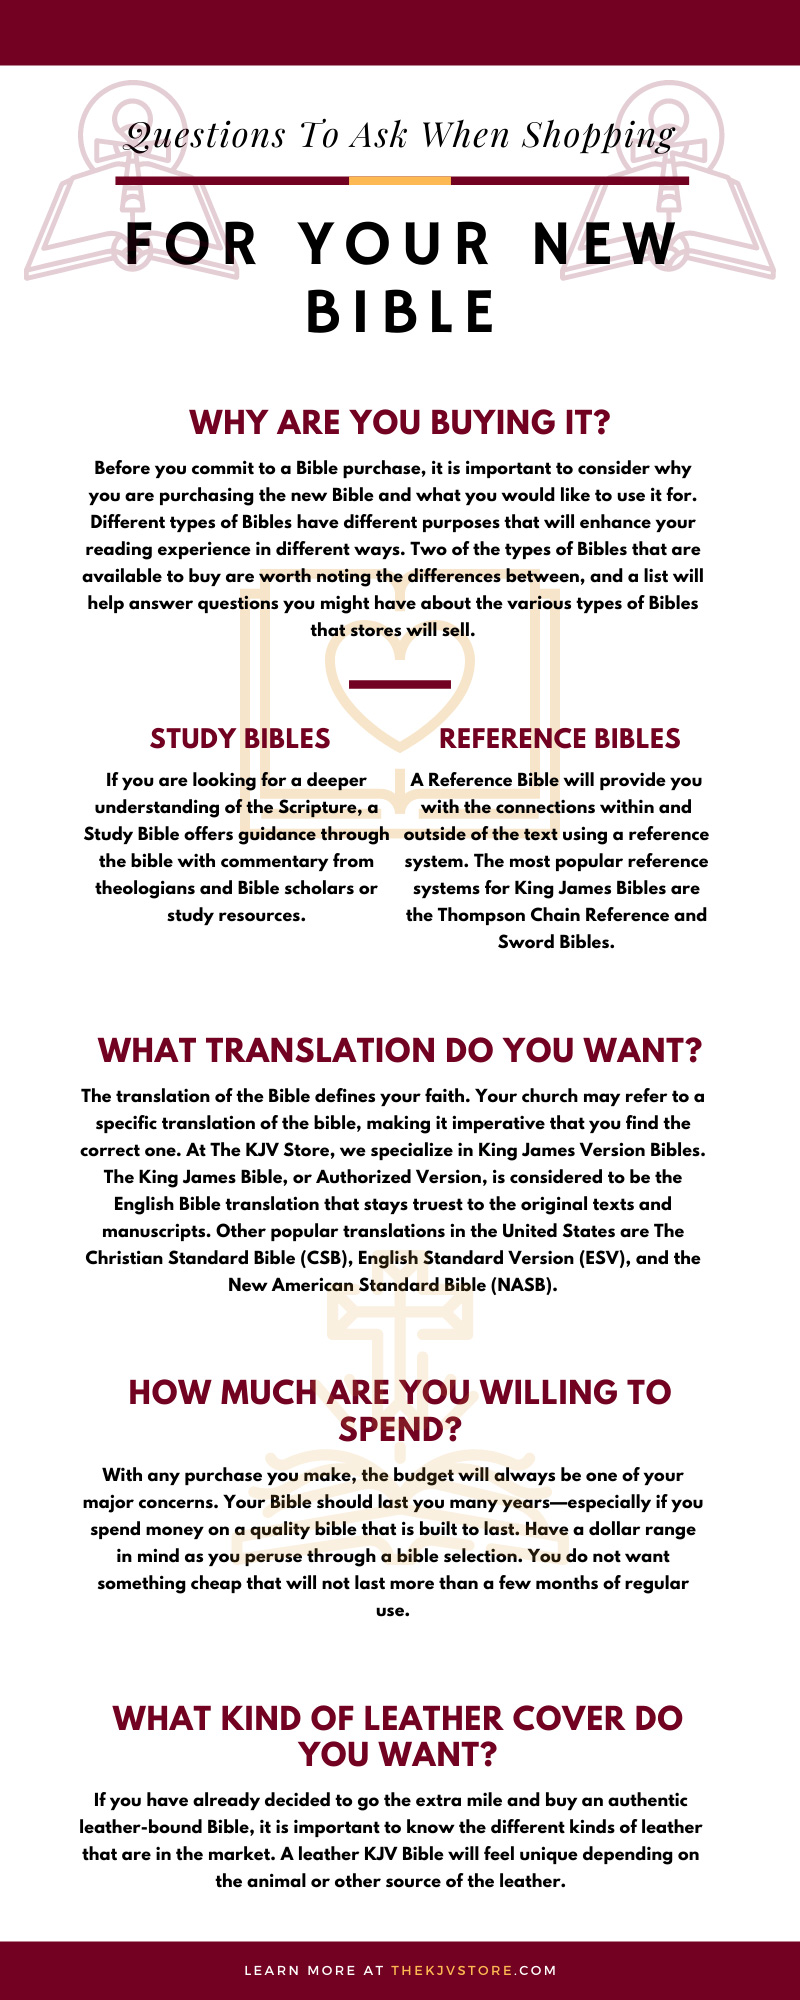 Questions To Ask When Shopping for Your New Bible